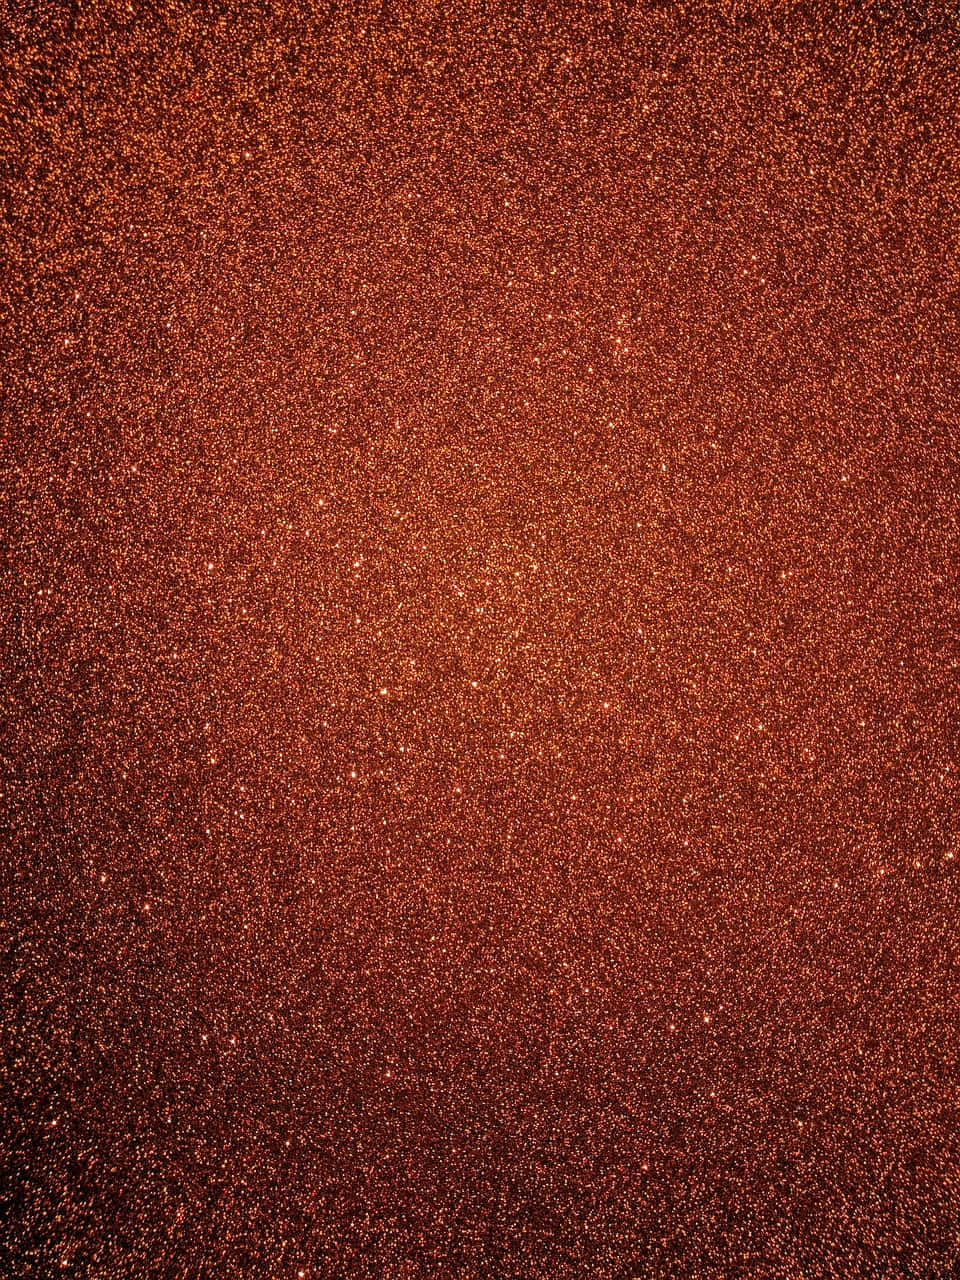 Burnt Orange Background Glittery Particles